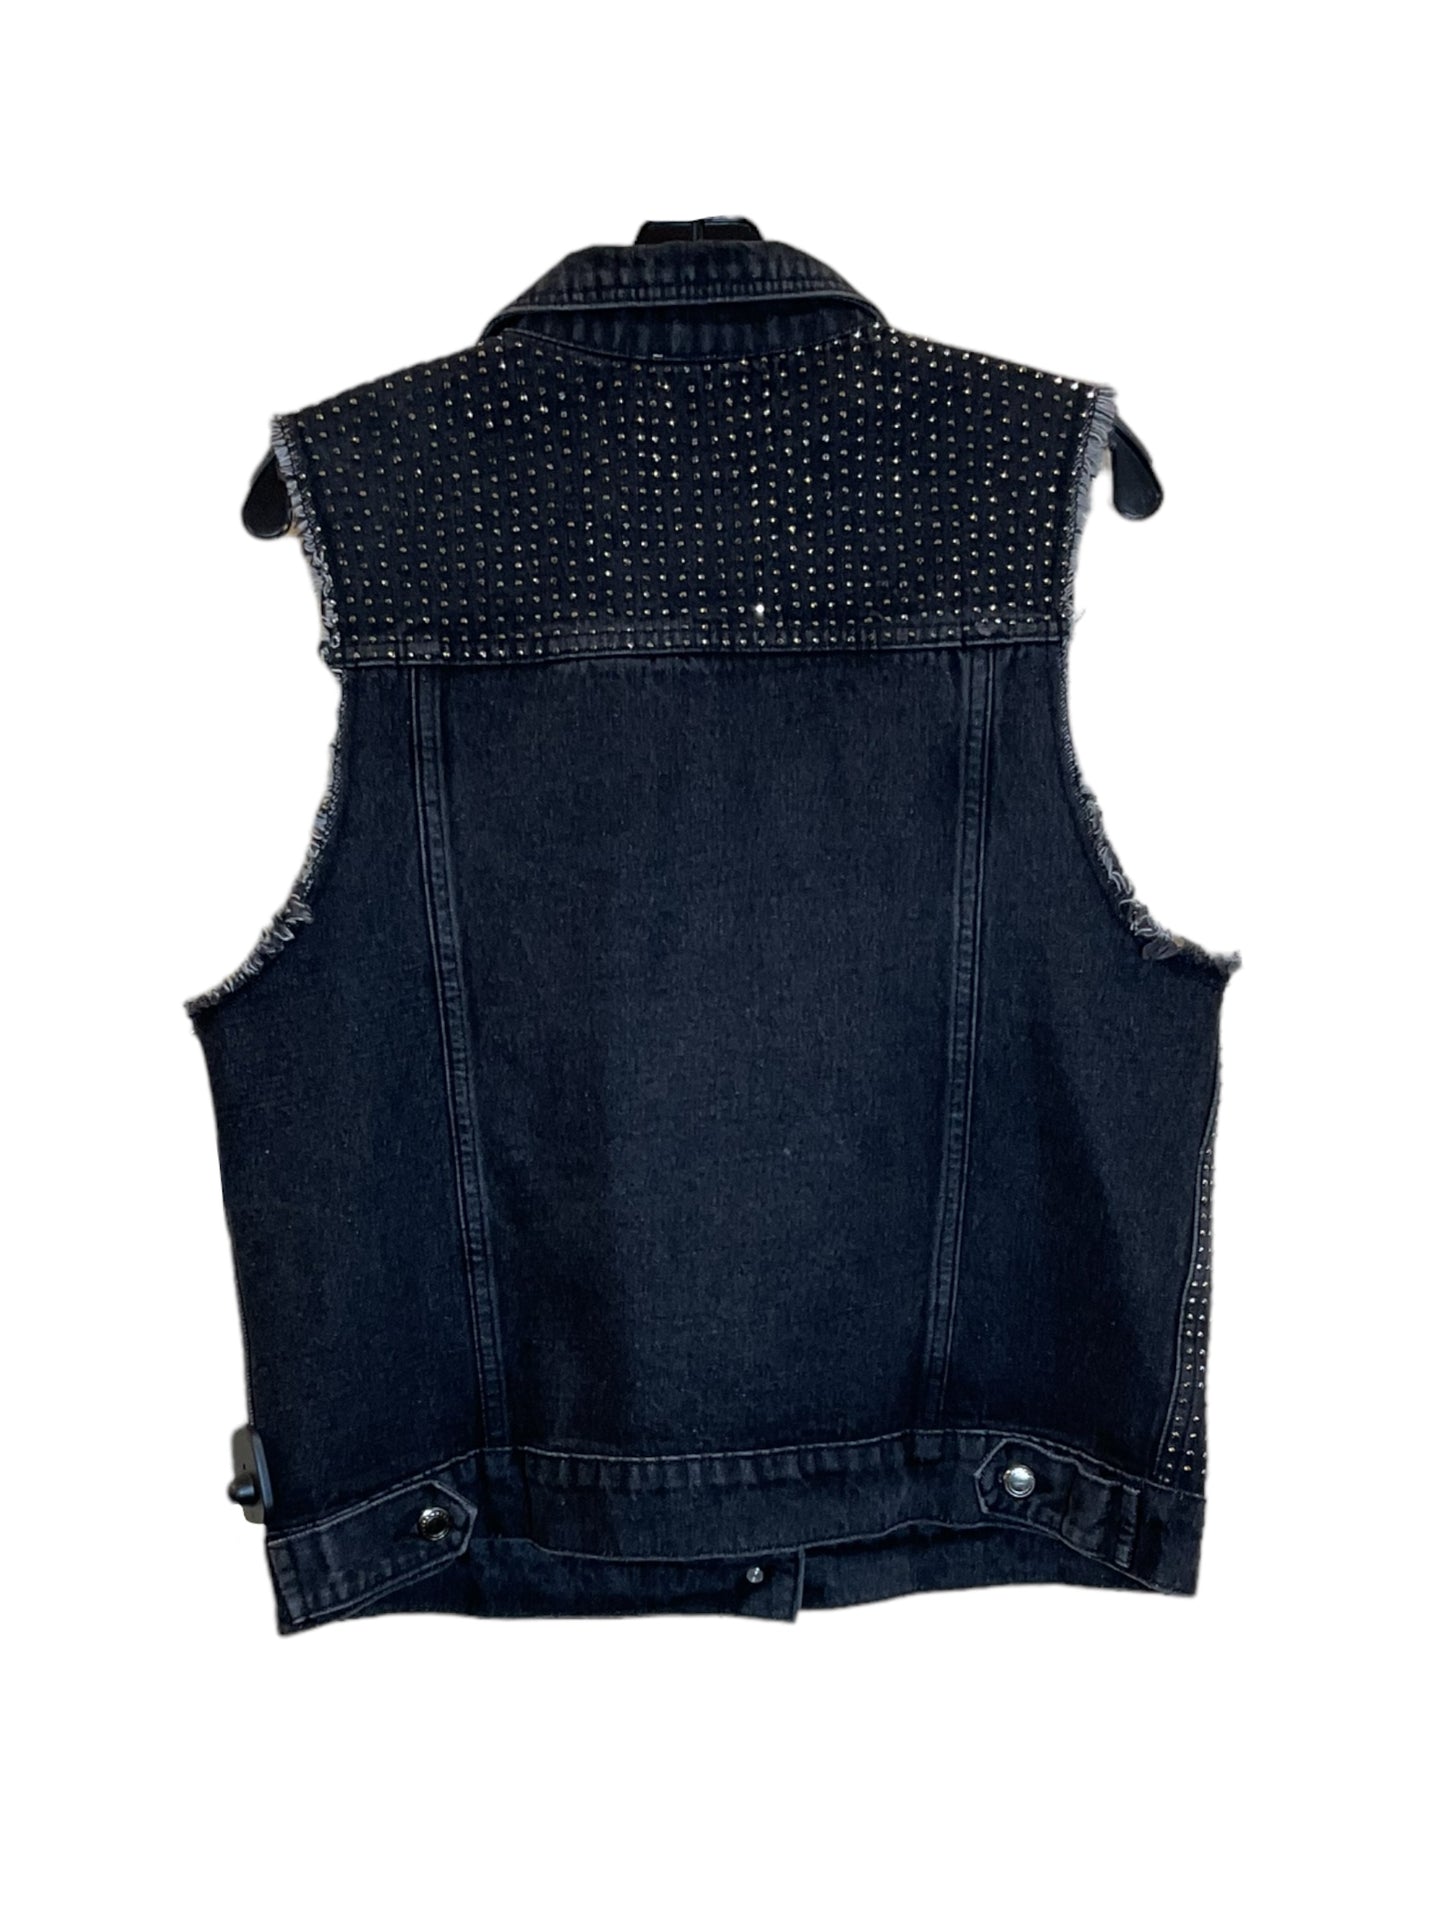 Vest Other By Vocal  Size: L